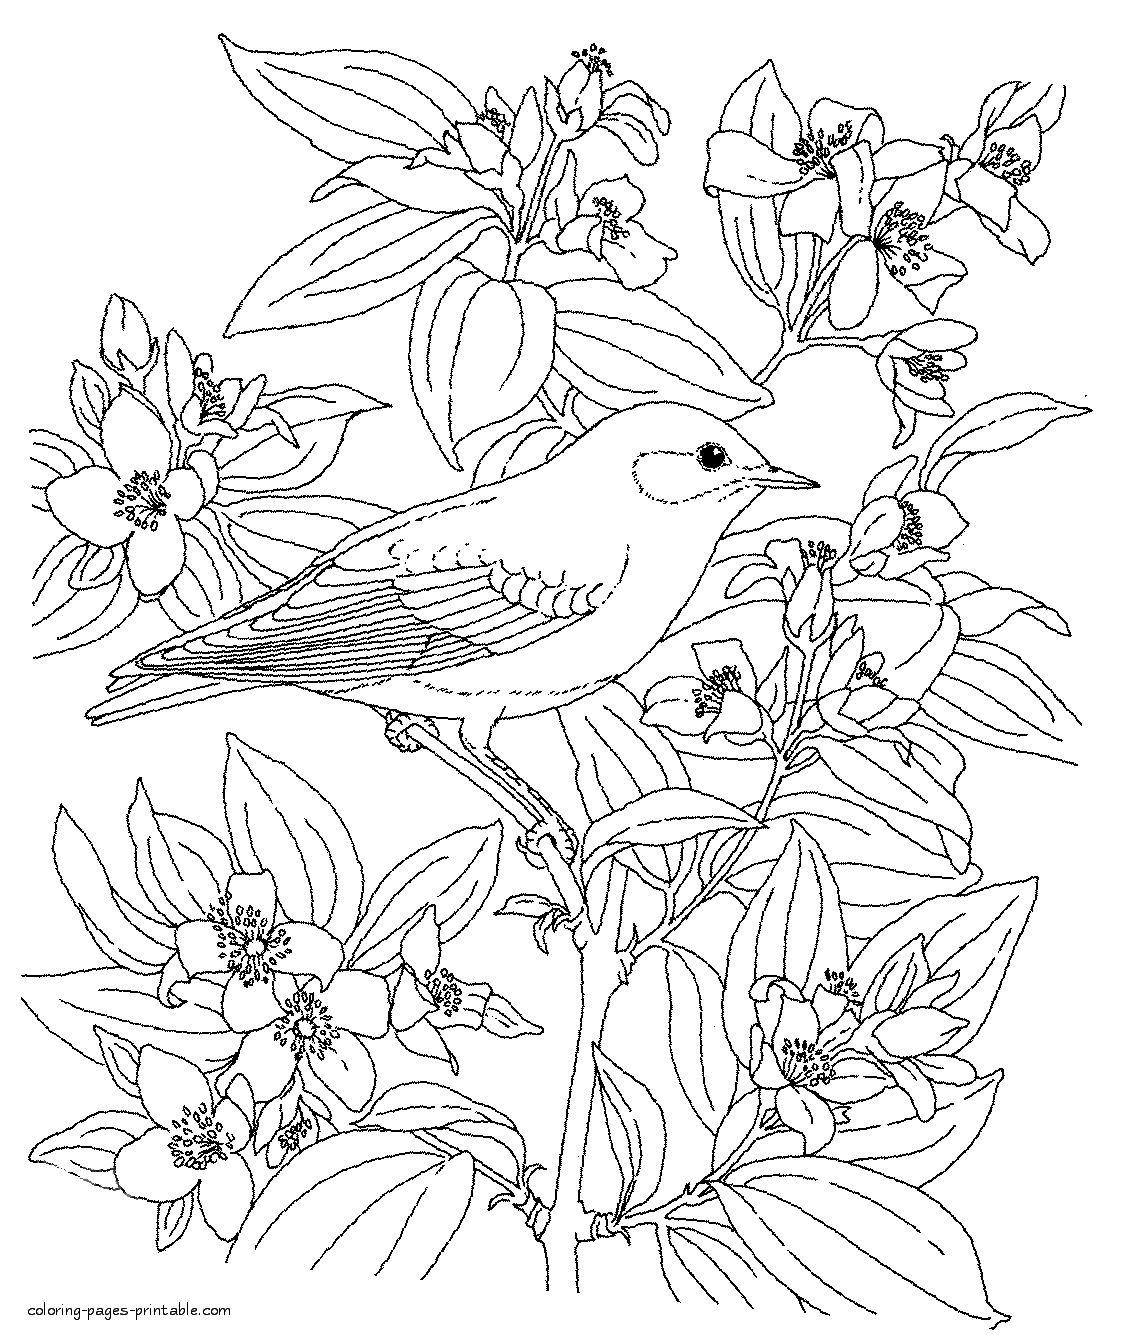 Bird Colouring Book    COLORING PAGES PRINTABLE.COM